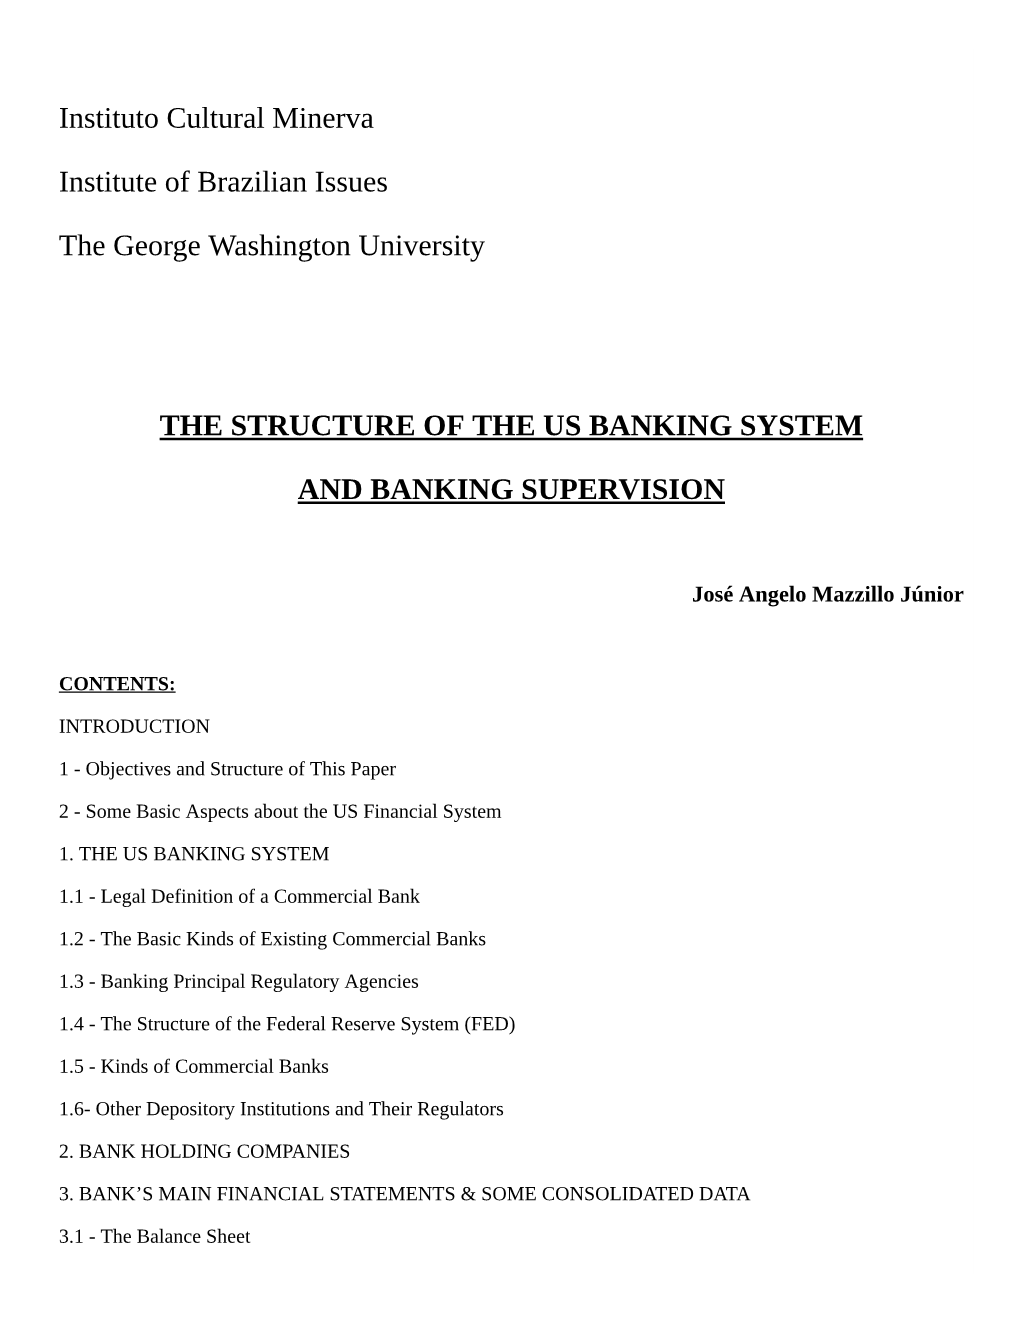 The Structure of the Us Banking System and Banking Supervision